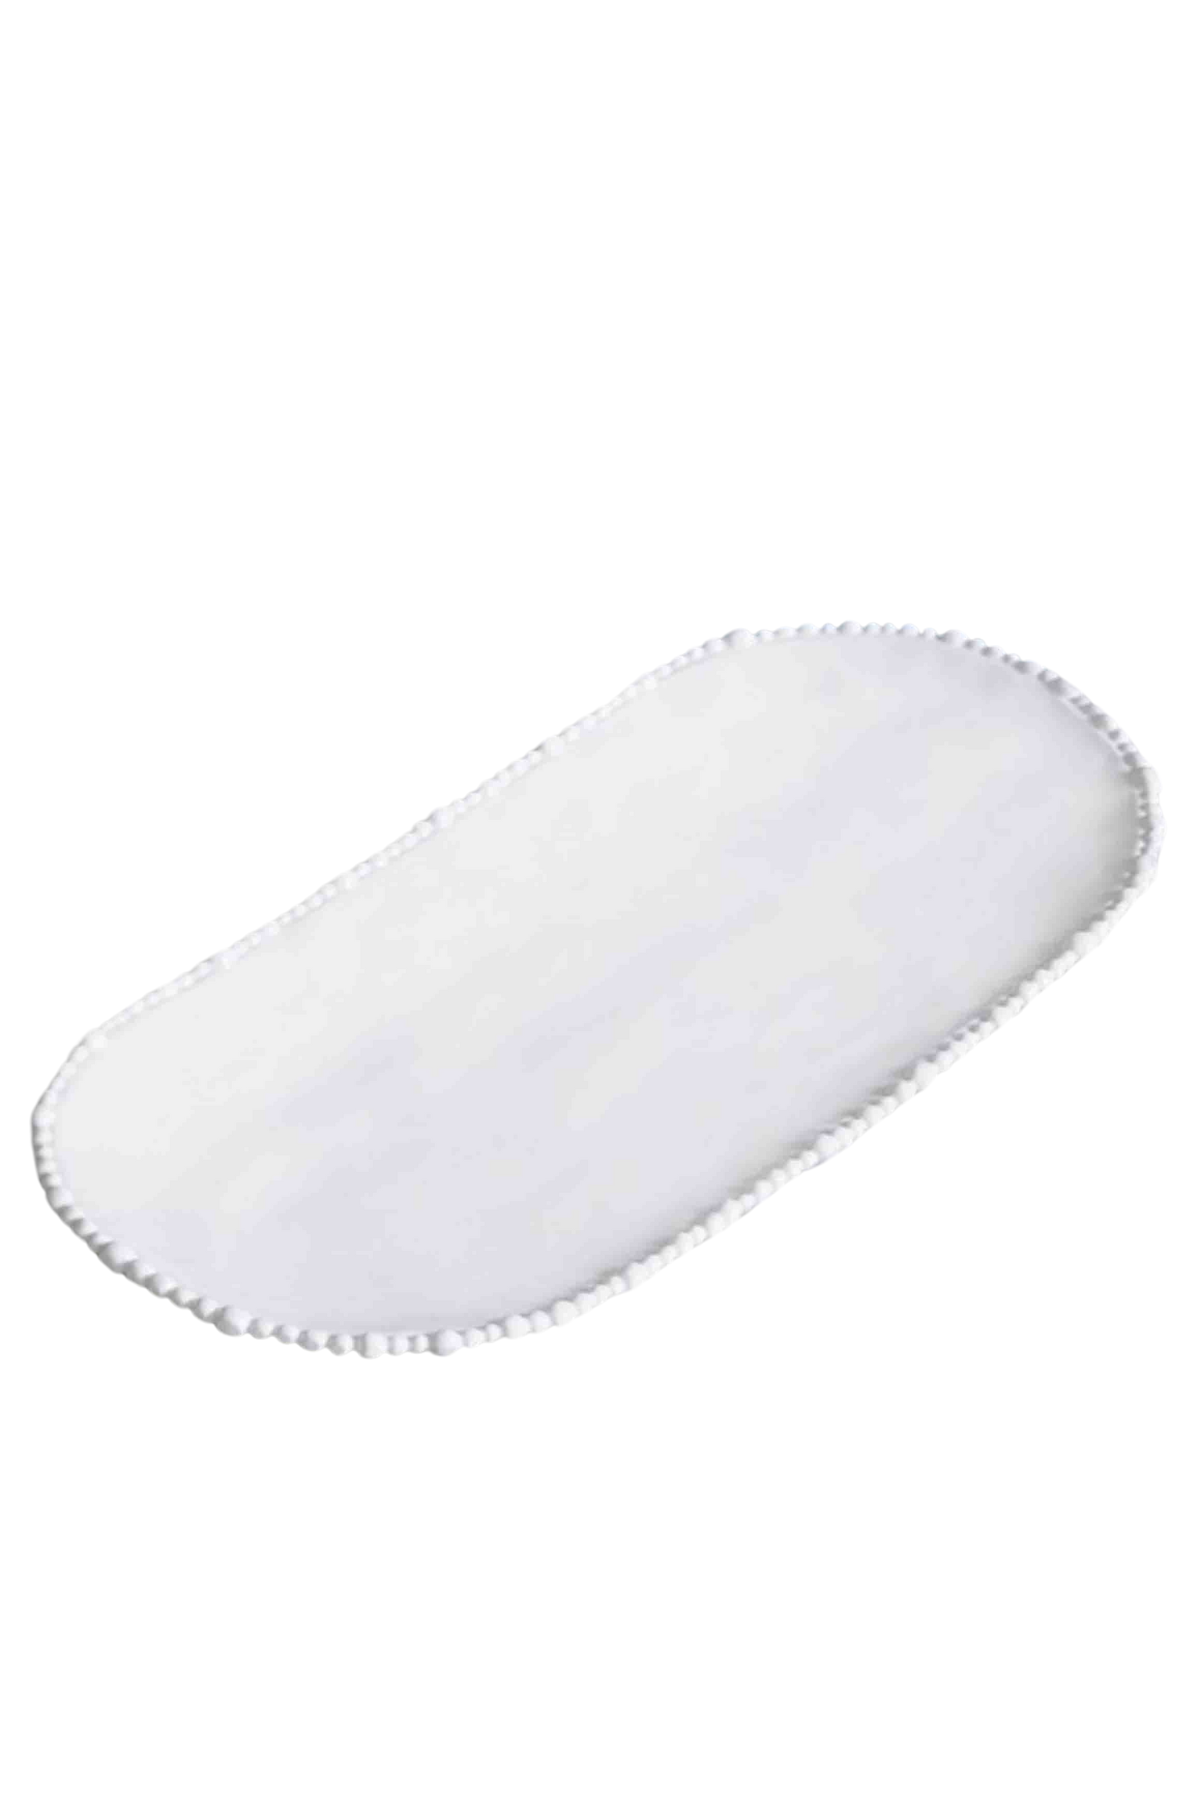 Brilliant White Luxury VIDA Alegria Large Oval Platter by Beatriz Ball with Pearl rimmed detail